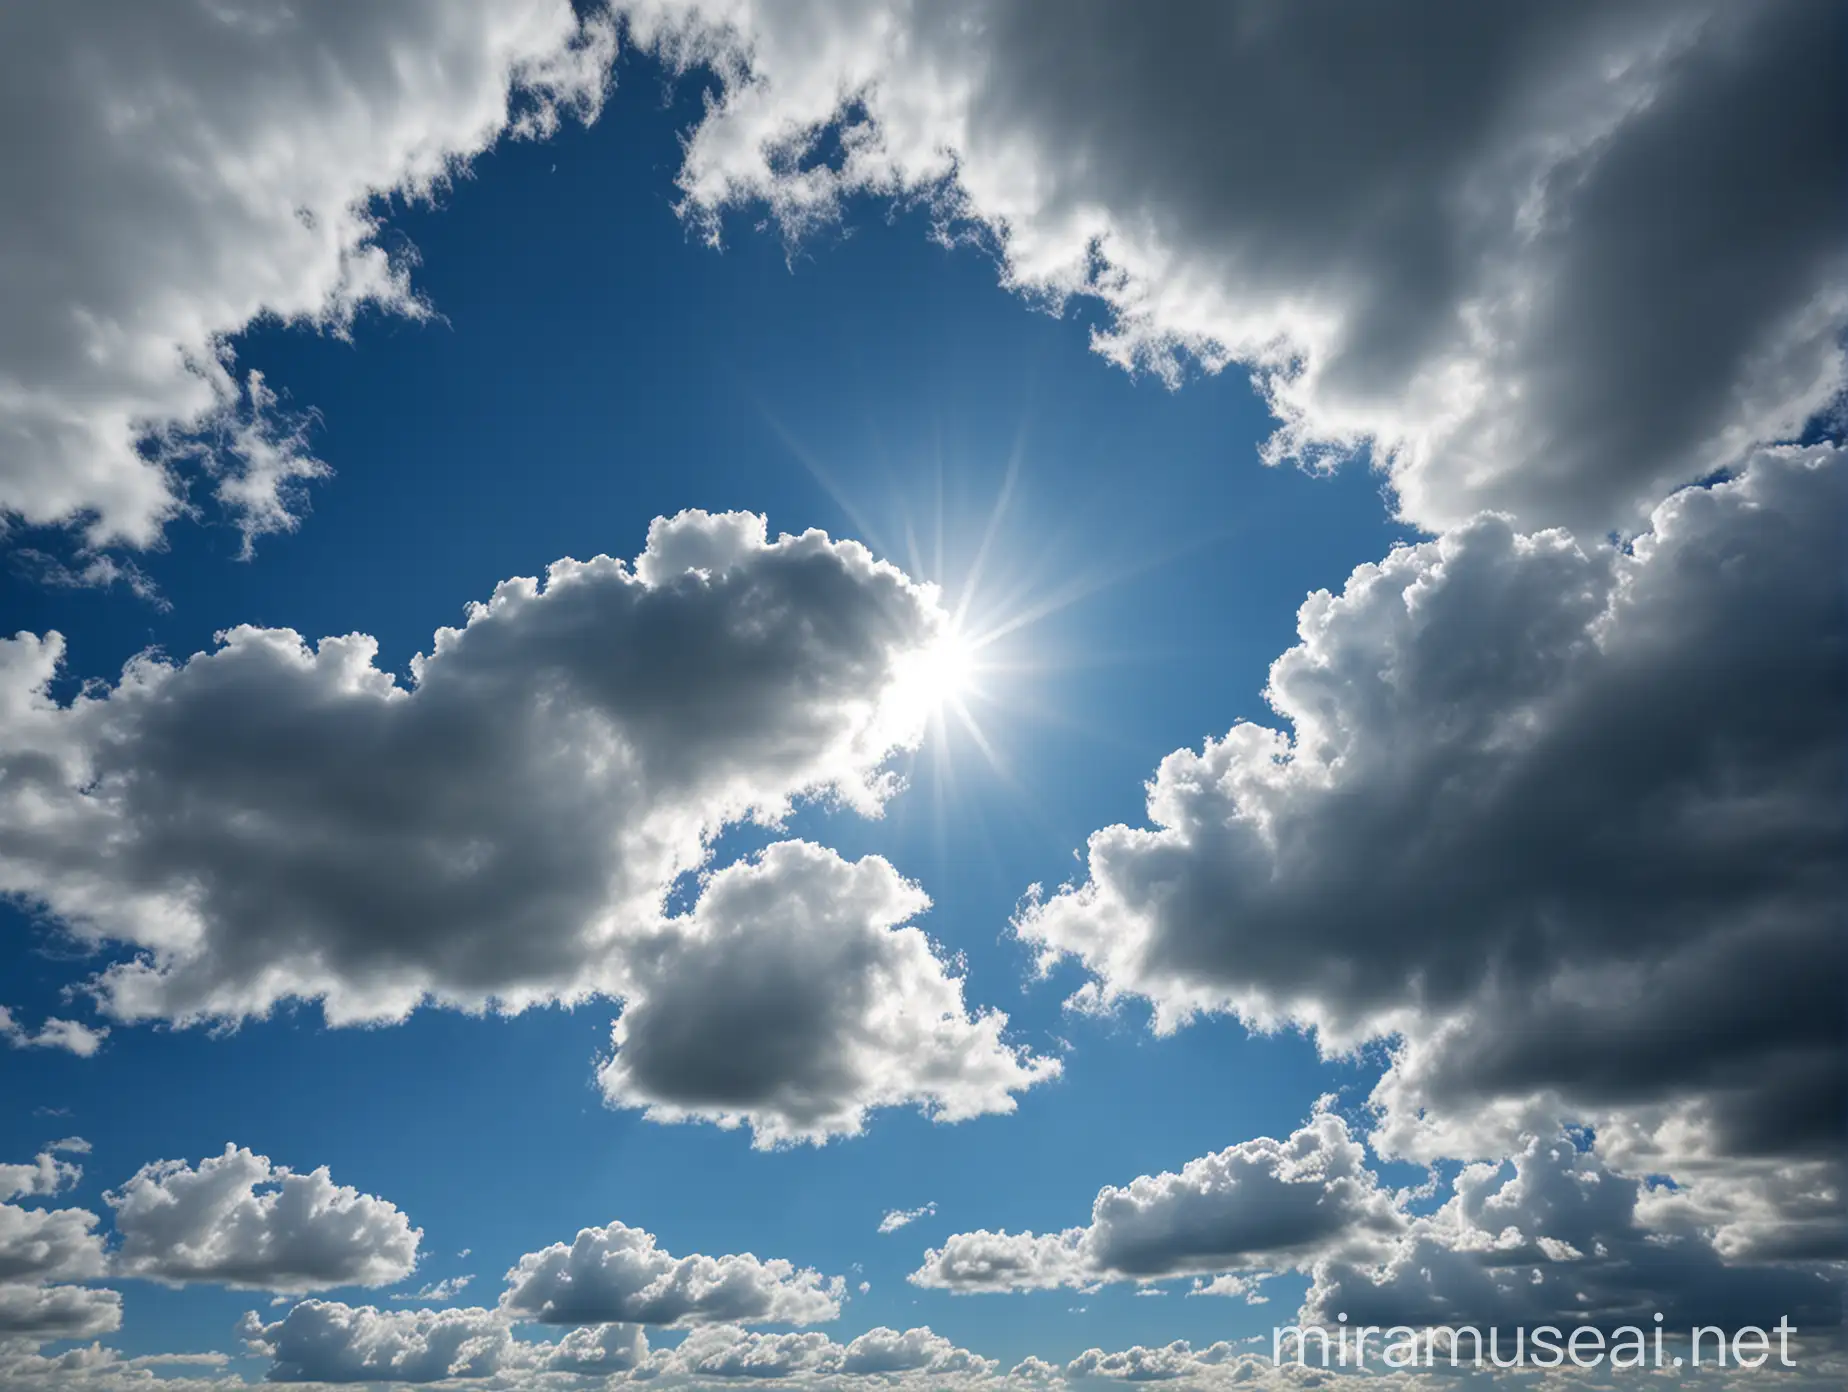 Bright Blue Sky with White Clouds Illuminated by Sunlight